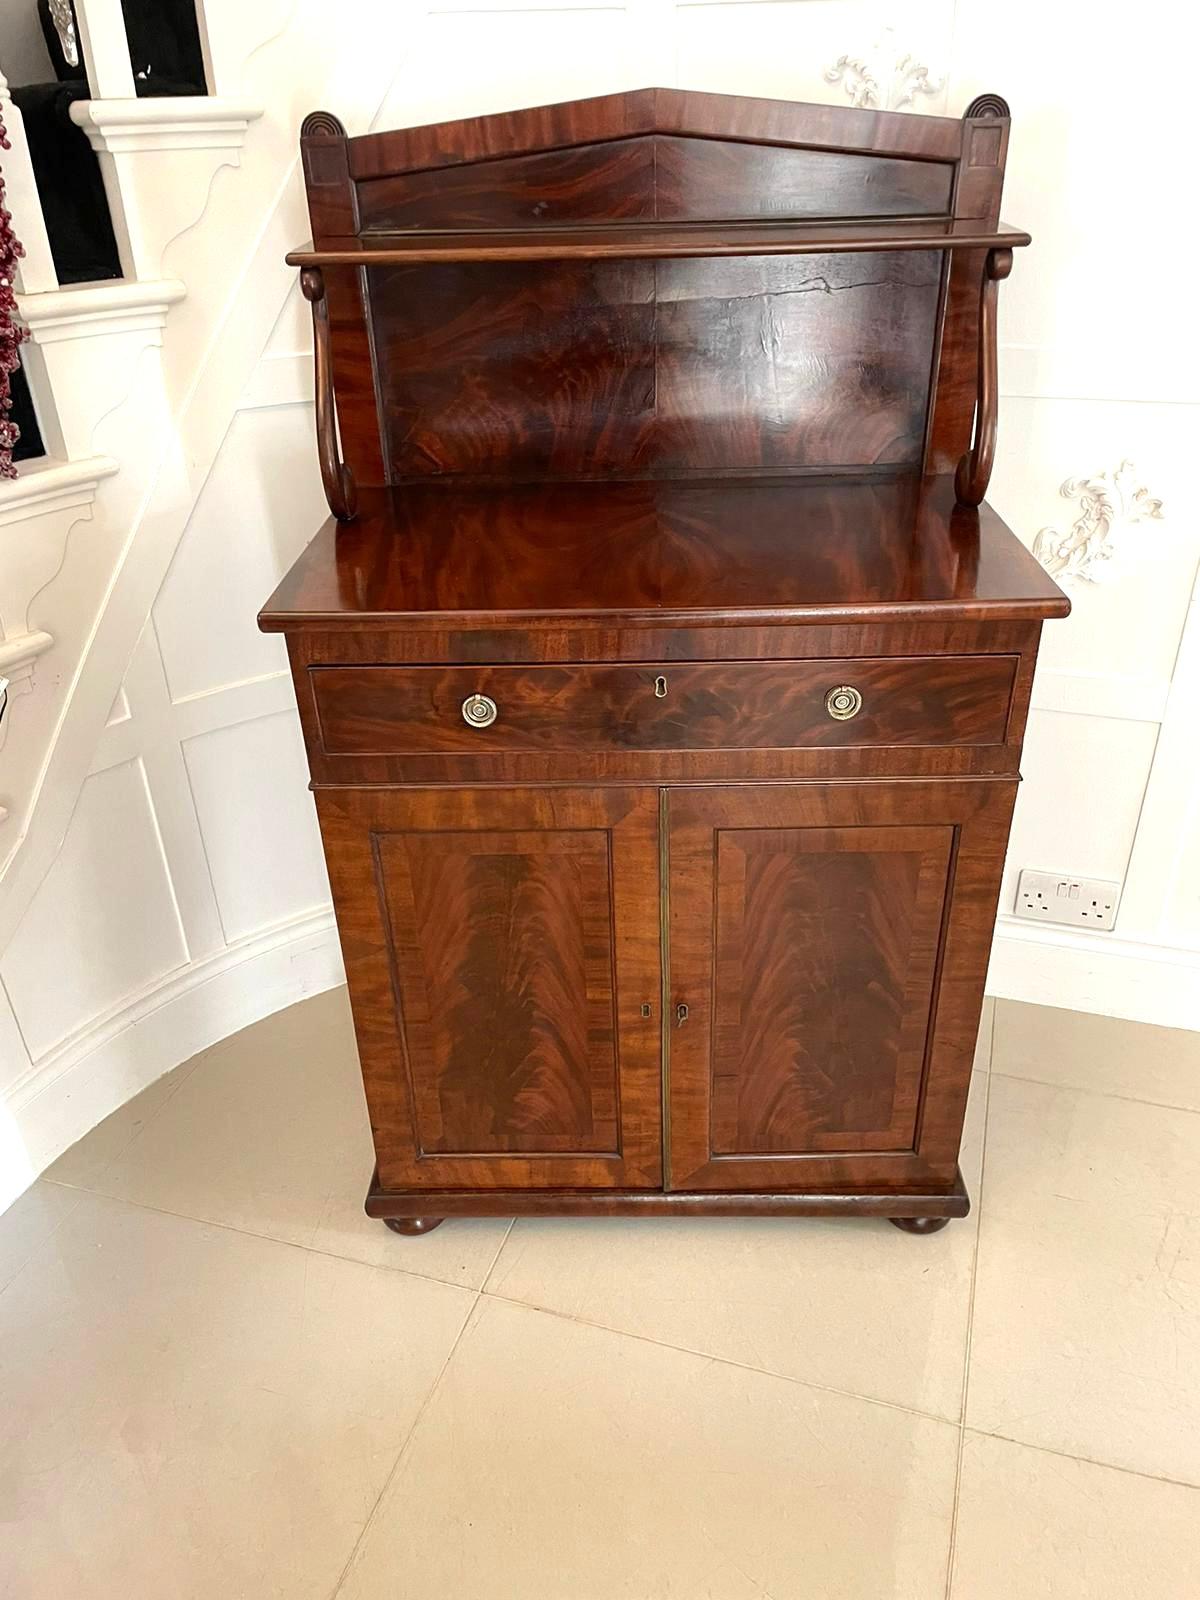 Antique Regency quality figured mahogany chiffonier having a quality figured mahogany back with a single shelf supported by shaped scroll supports above a rectangular shaped mahogany top above one long cutlery drawer. It boasts original brass